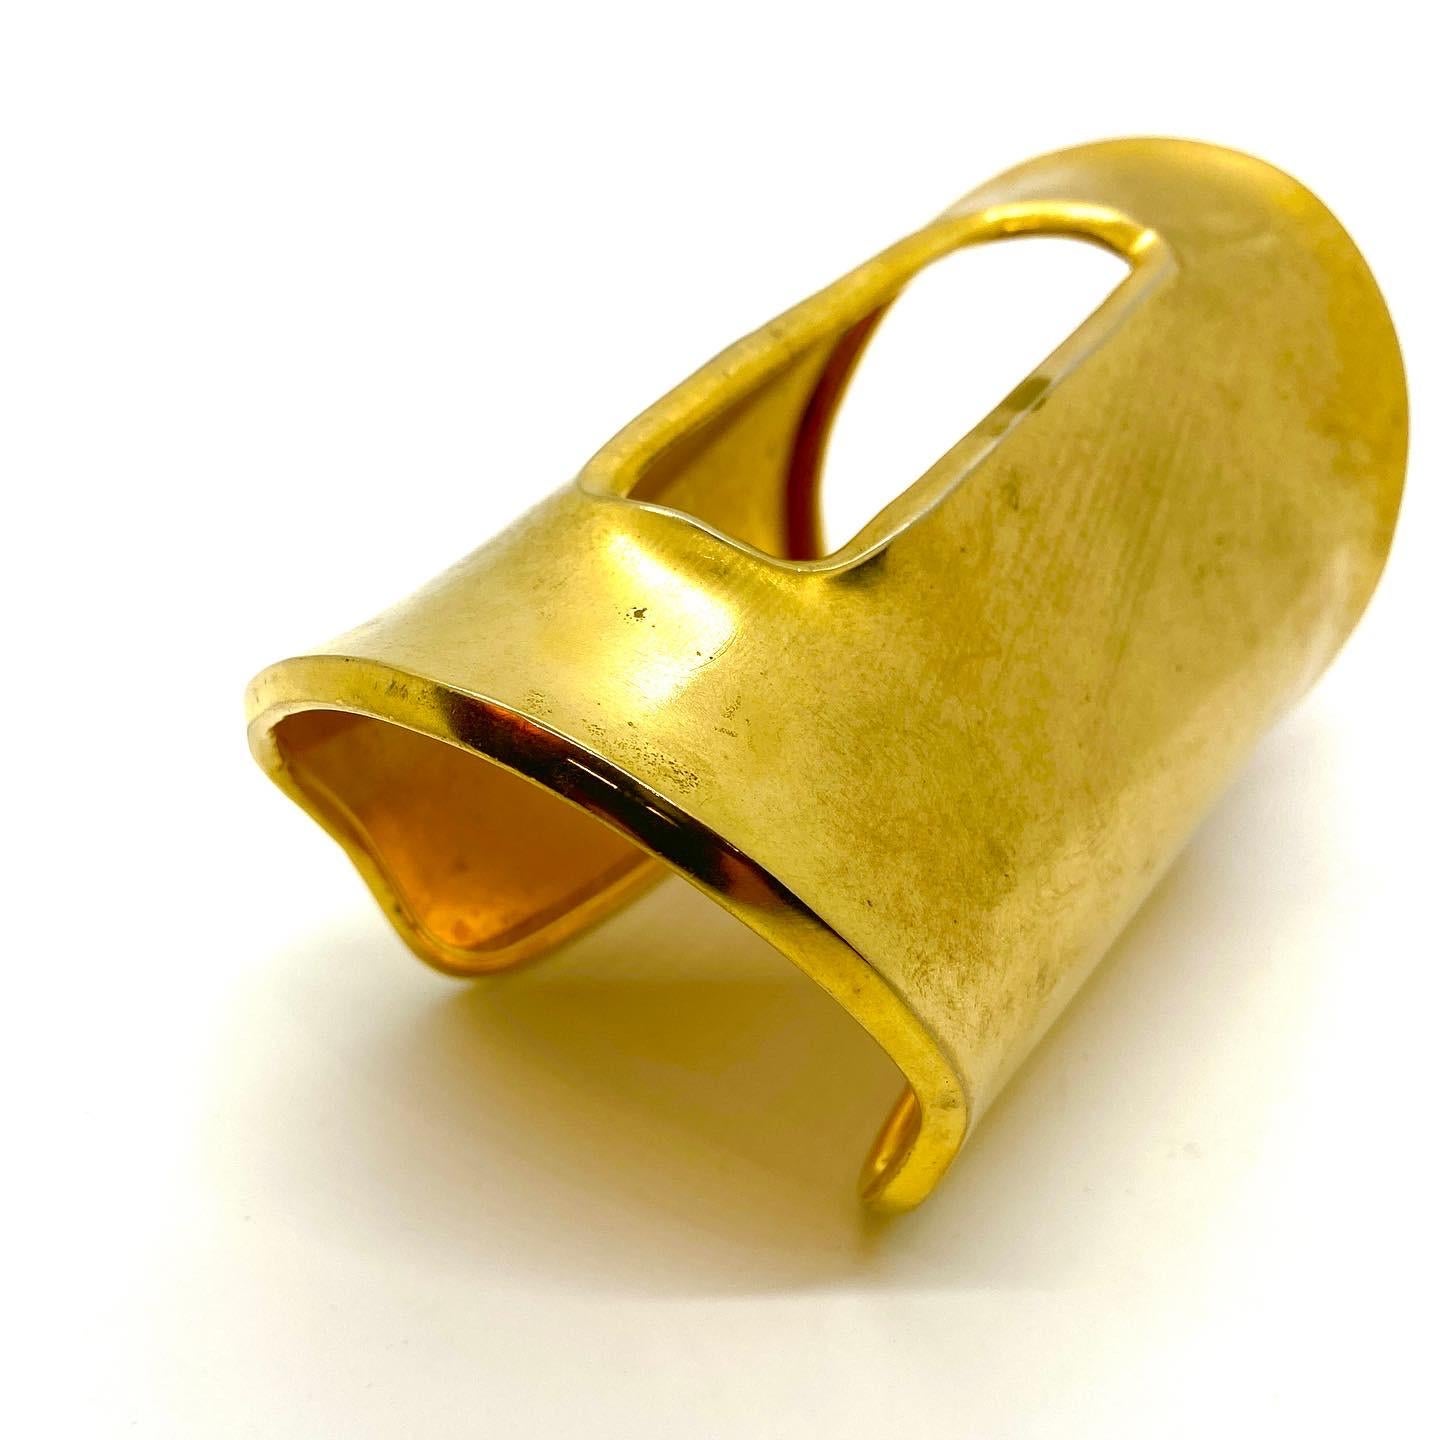 This one of a kind spectacular and dramatic matte gold plated cuff is a statement bracelet. Created as a publicity piece, it fed into the voracious appetite of the fashion magazine editors for bigger and more stunning jewelry during the period of